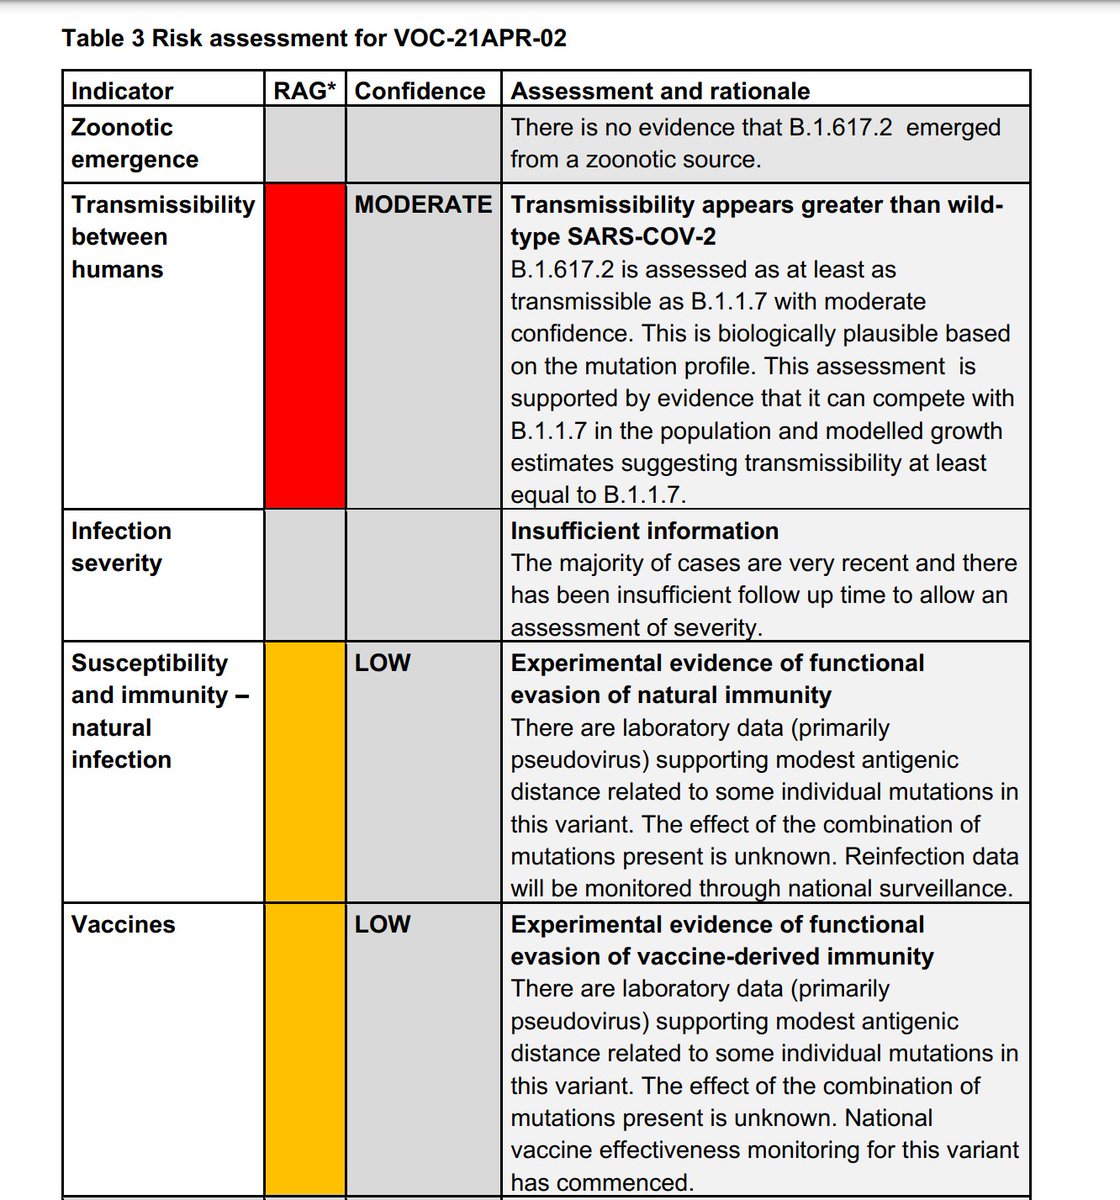 It's become a VOC because it's been spreading so fast - and in the community.PHE are pretty sure (MODERATE) it's *at least* as transmissible as our dominant "Kent" variant (B117) (RED rating). They are worried (AMBER) it might have some immune escape but don't know yet (LOW)